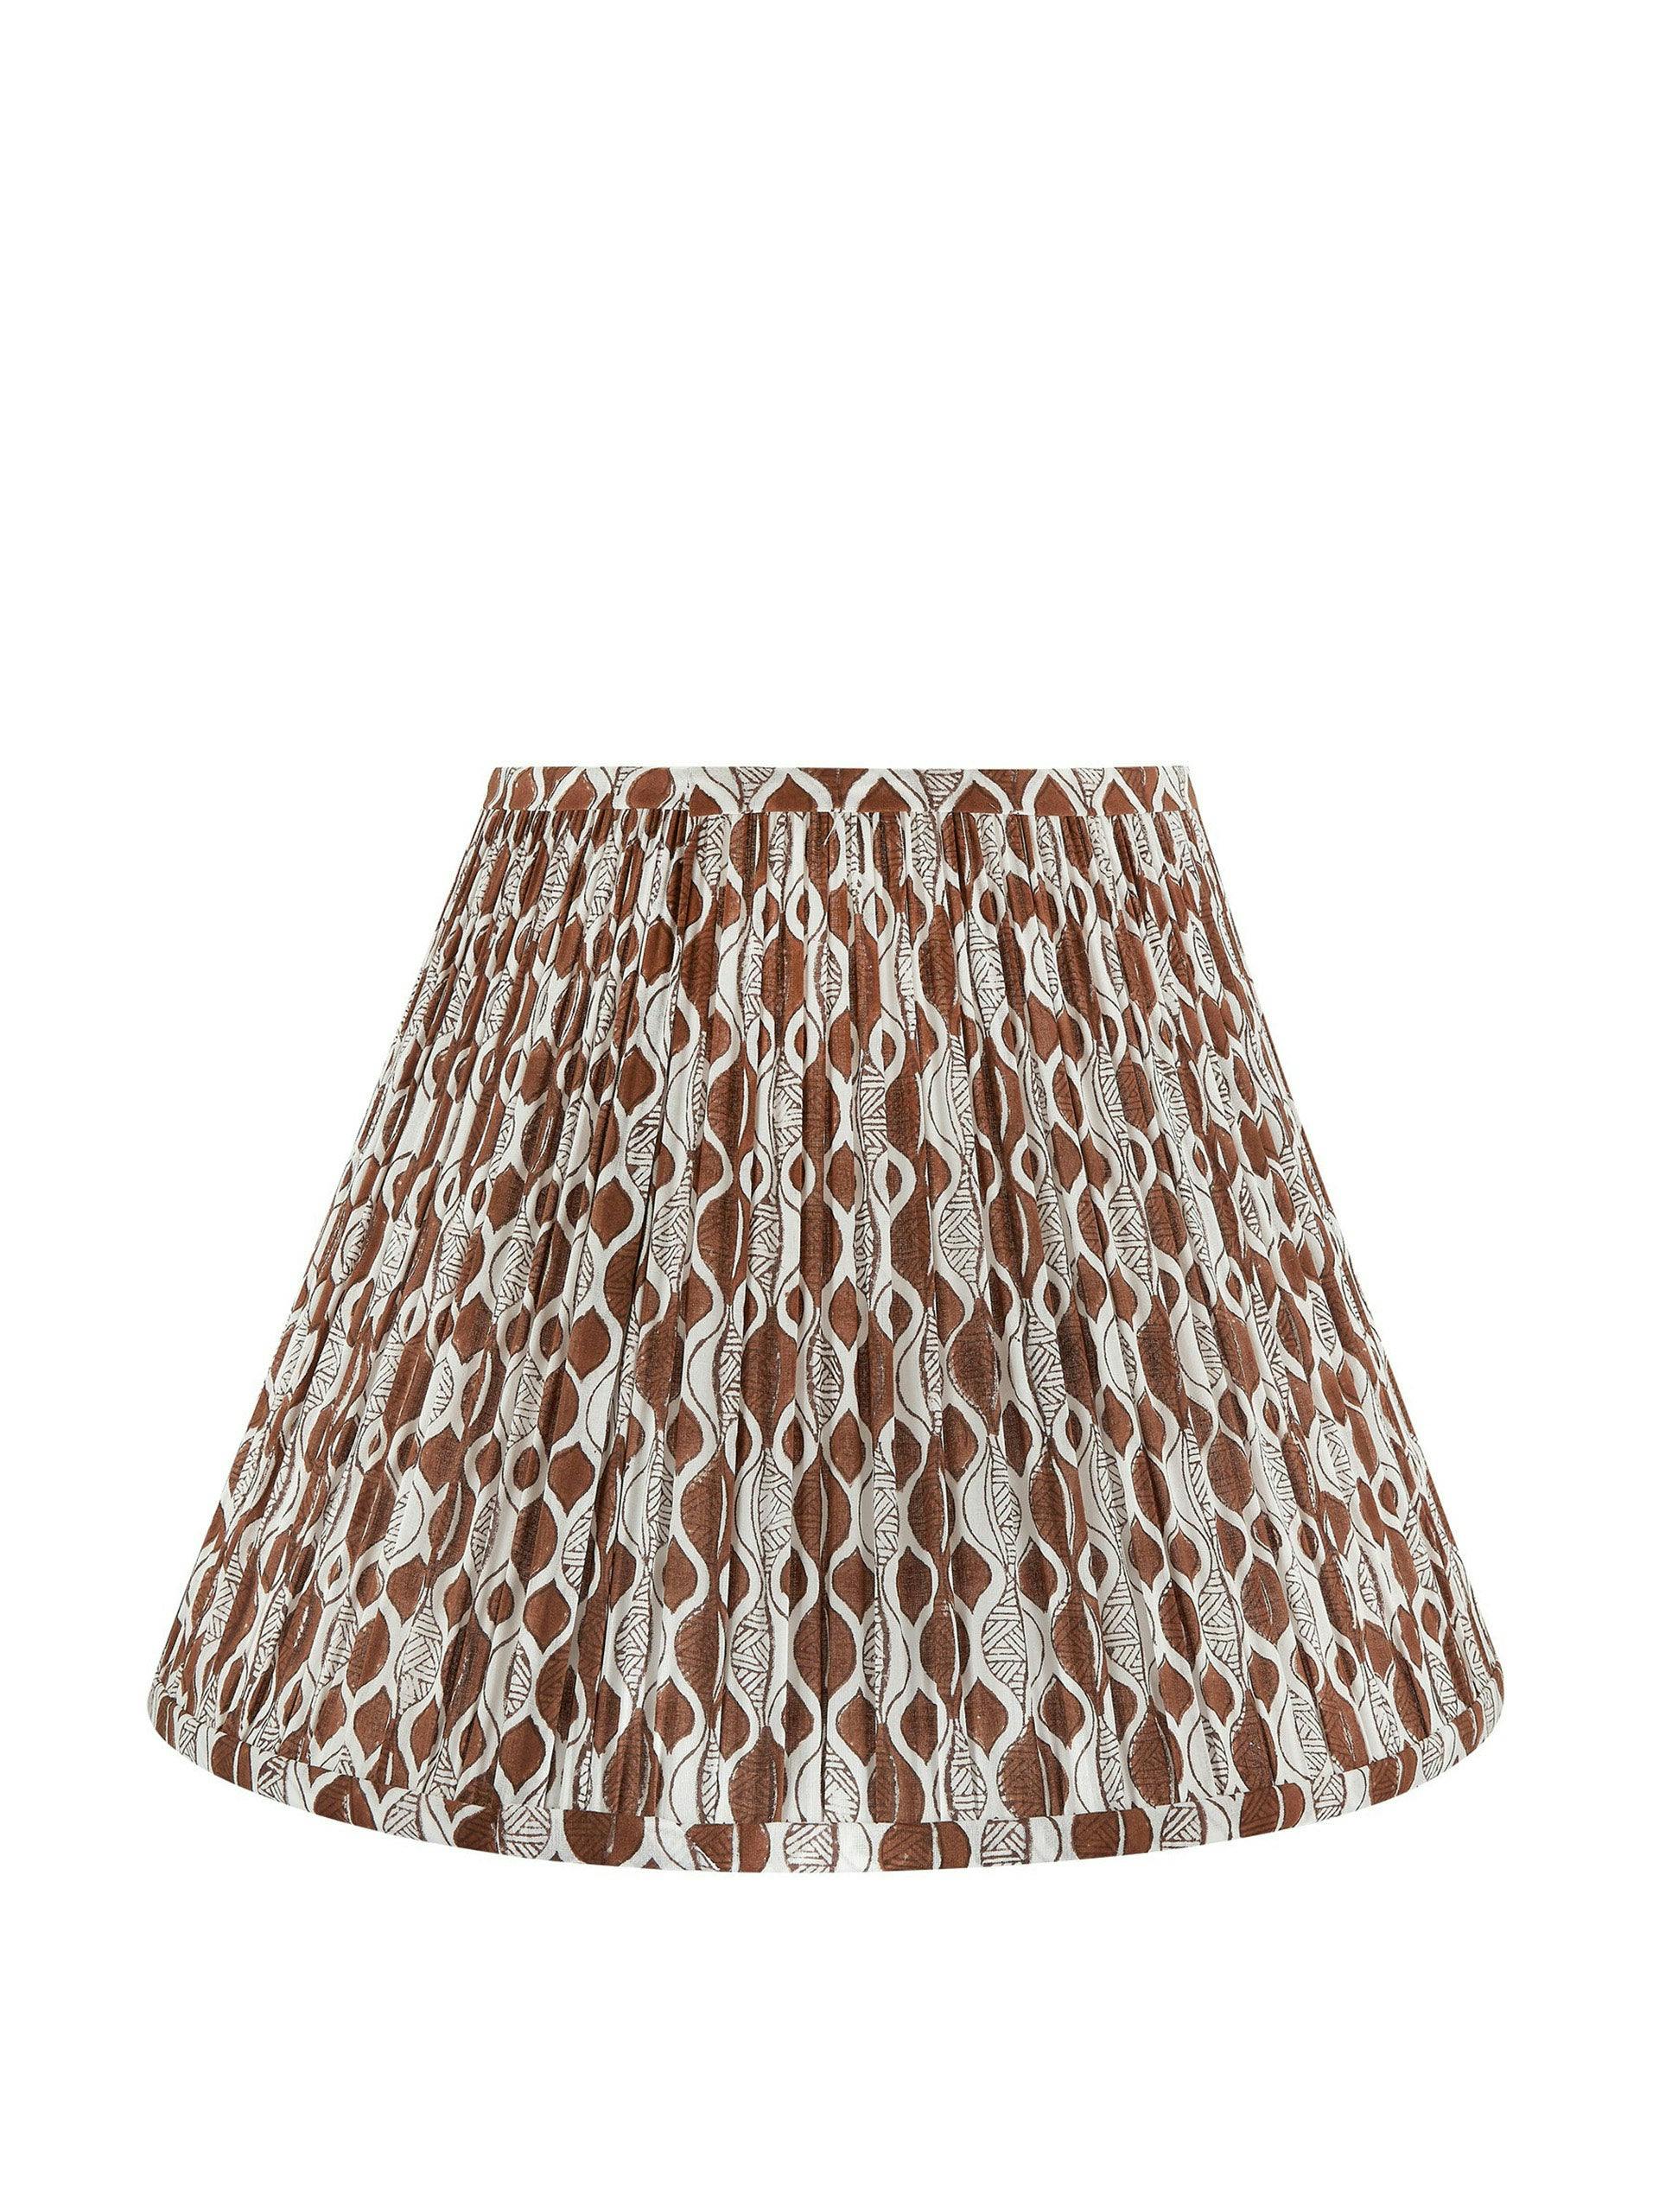 Brown patterned lampshade